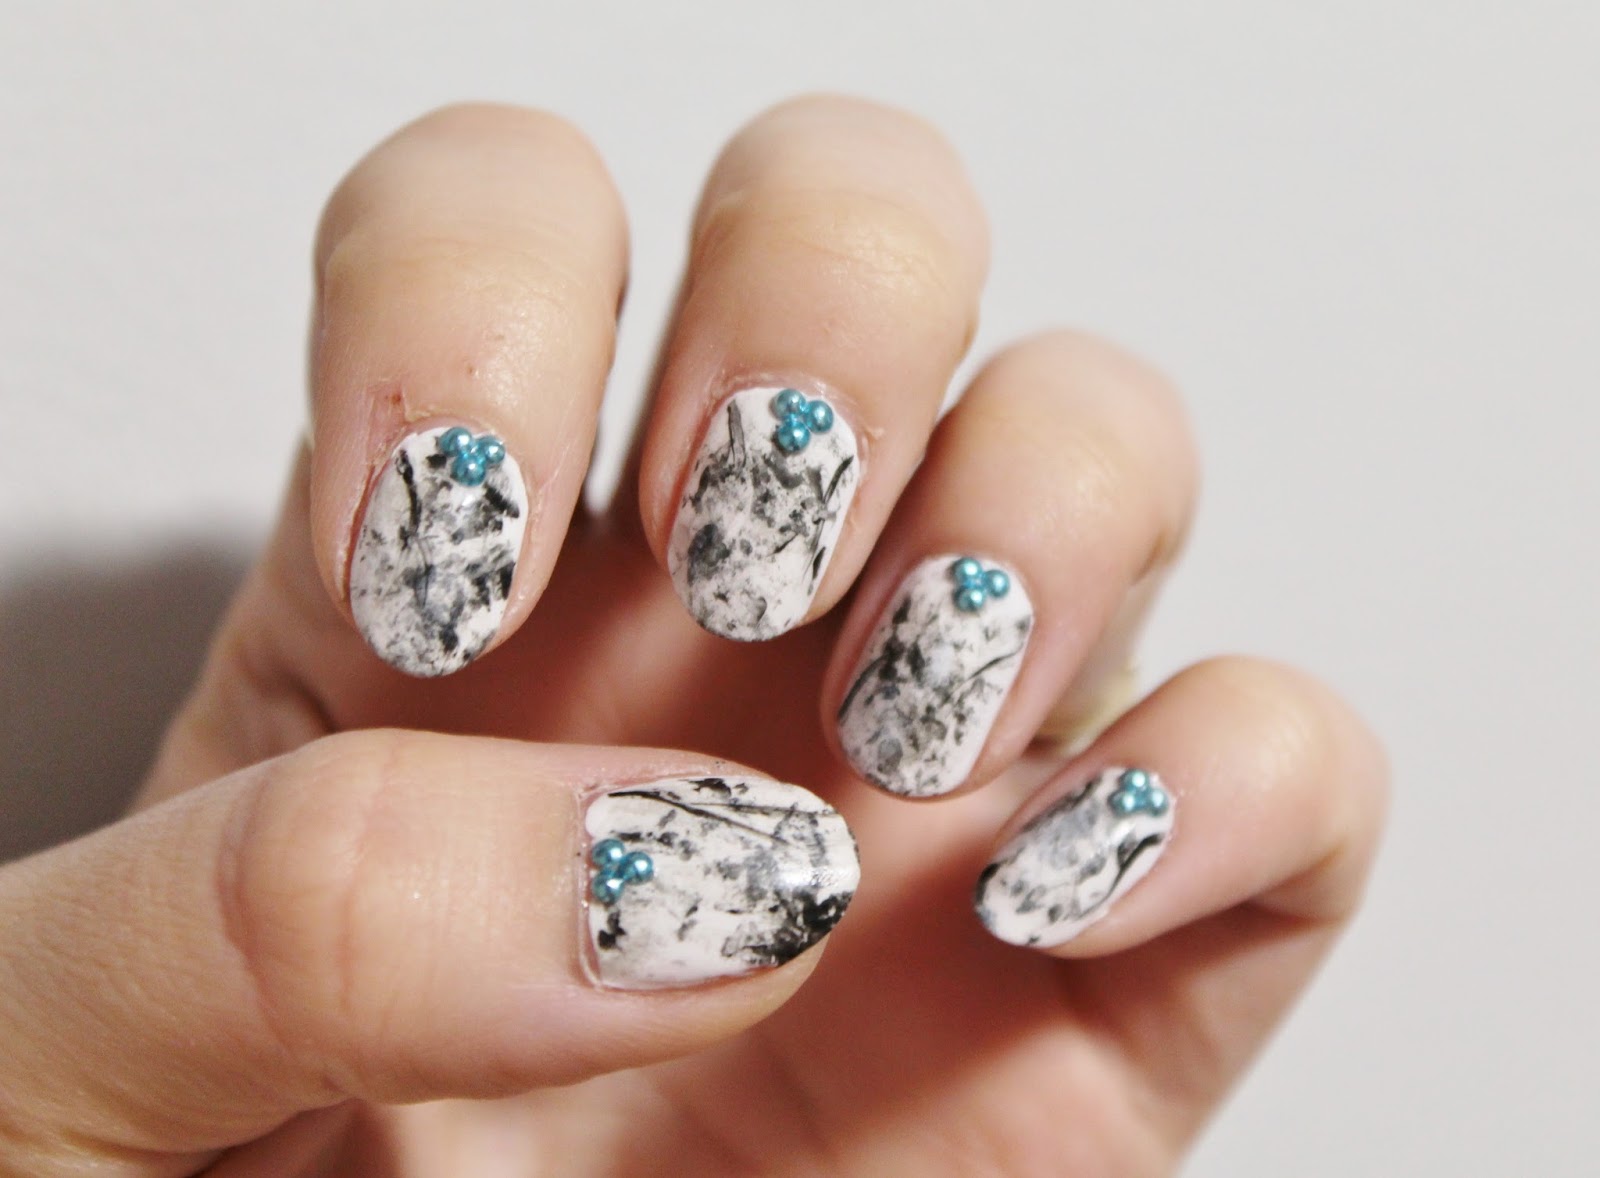 1. Easy Marble Nail Art Tutorial for Beginners - wide 5